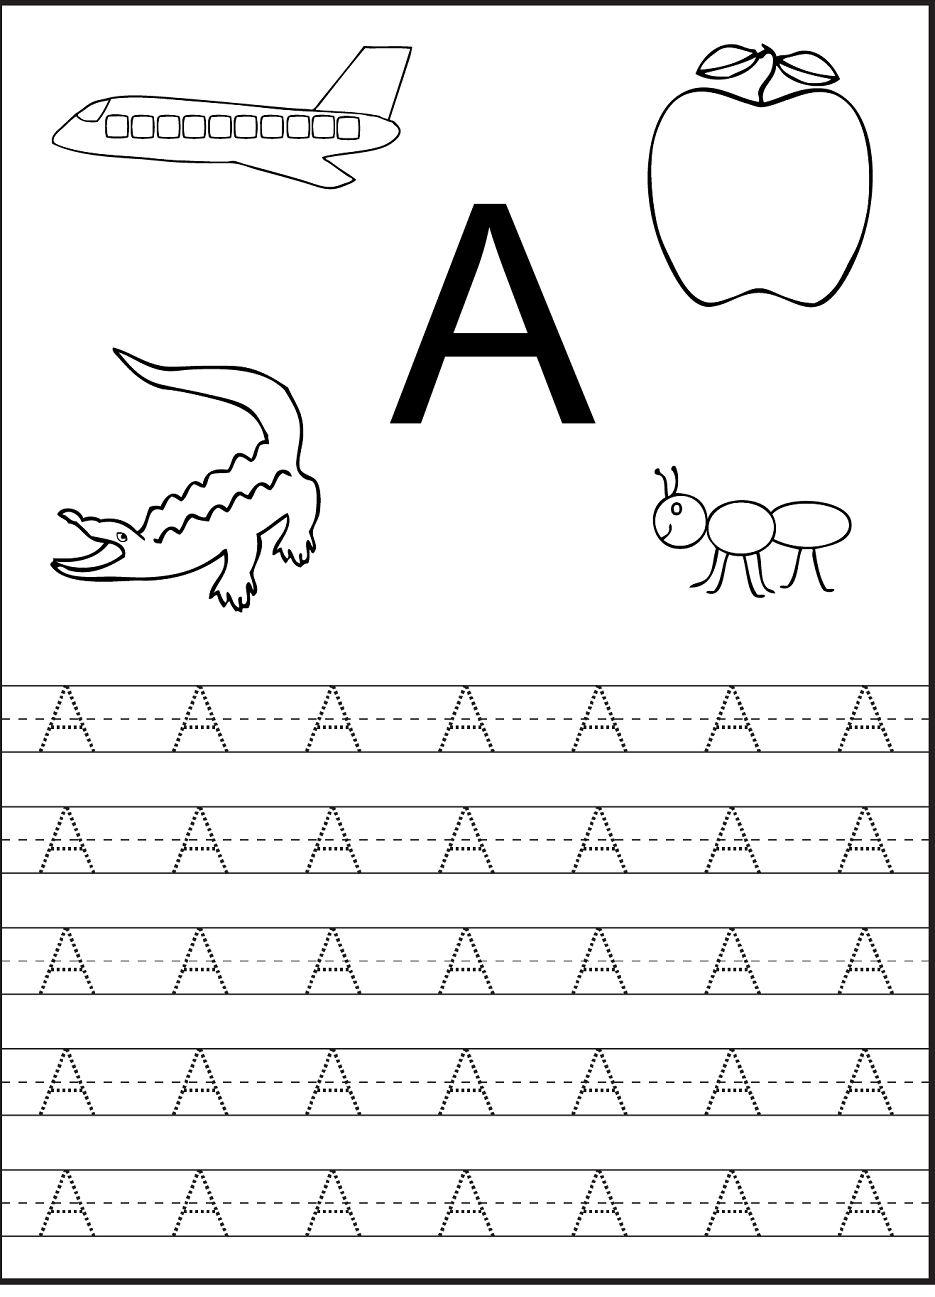 Tracing The Letter A Free Printable | Druckvorlage inside Pre-K Tracing Letters Worksheets